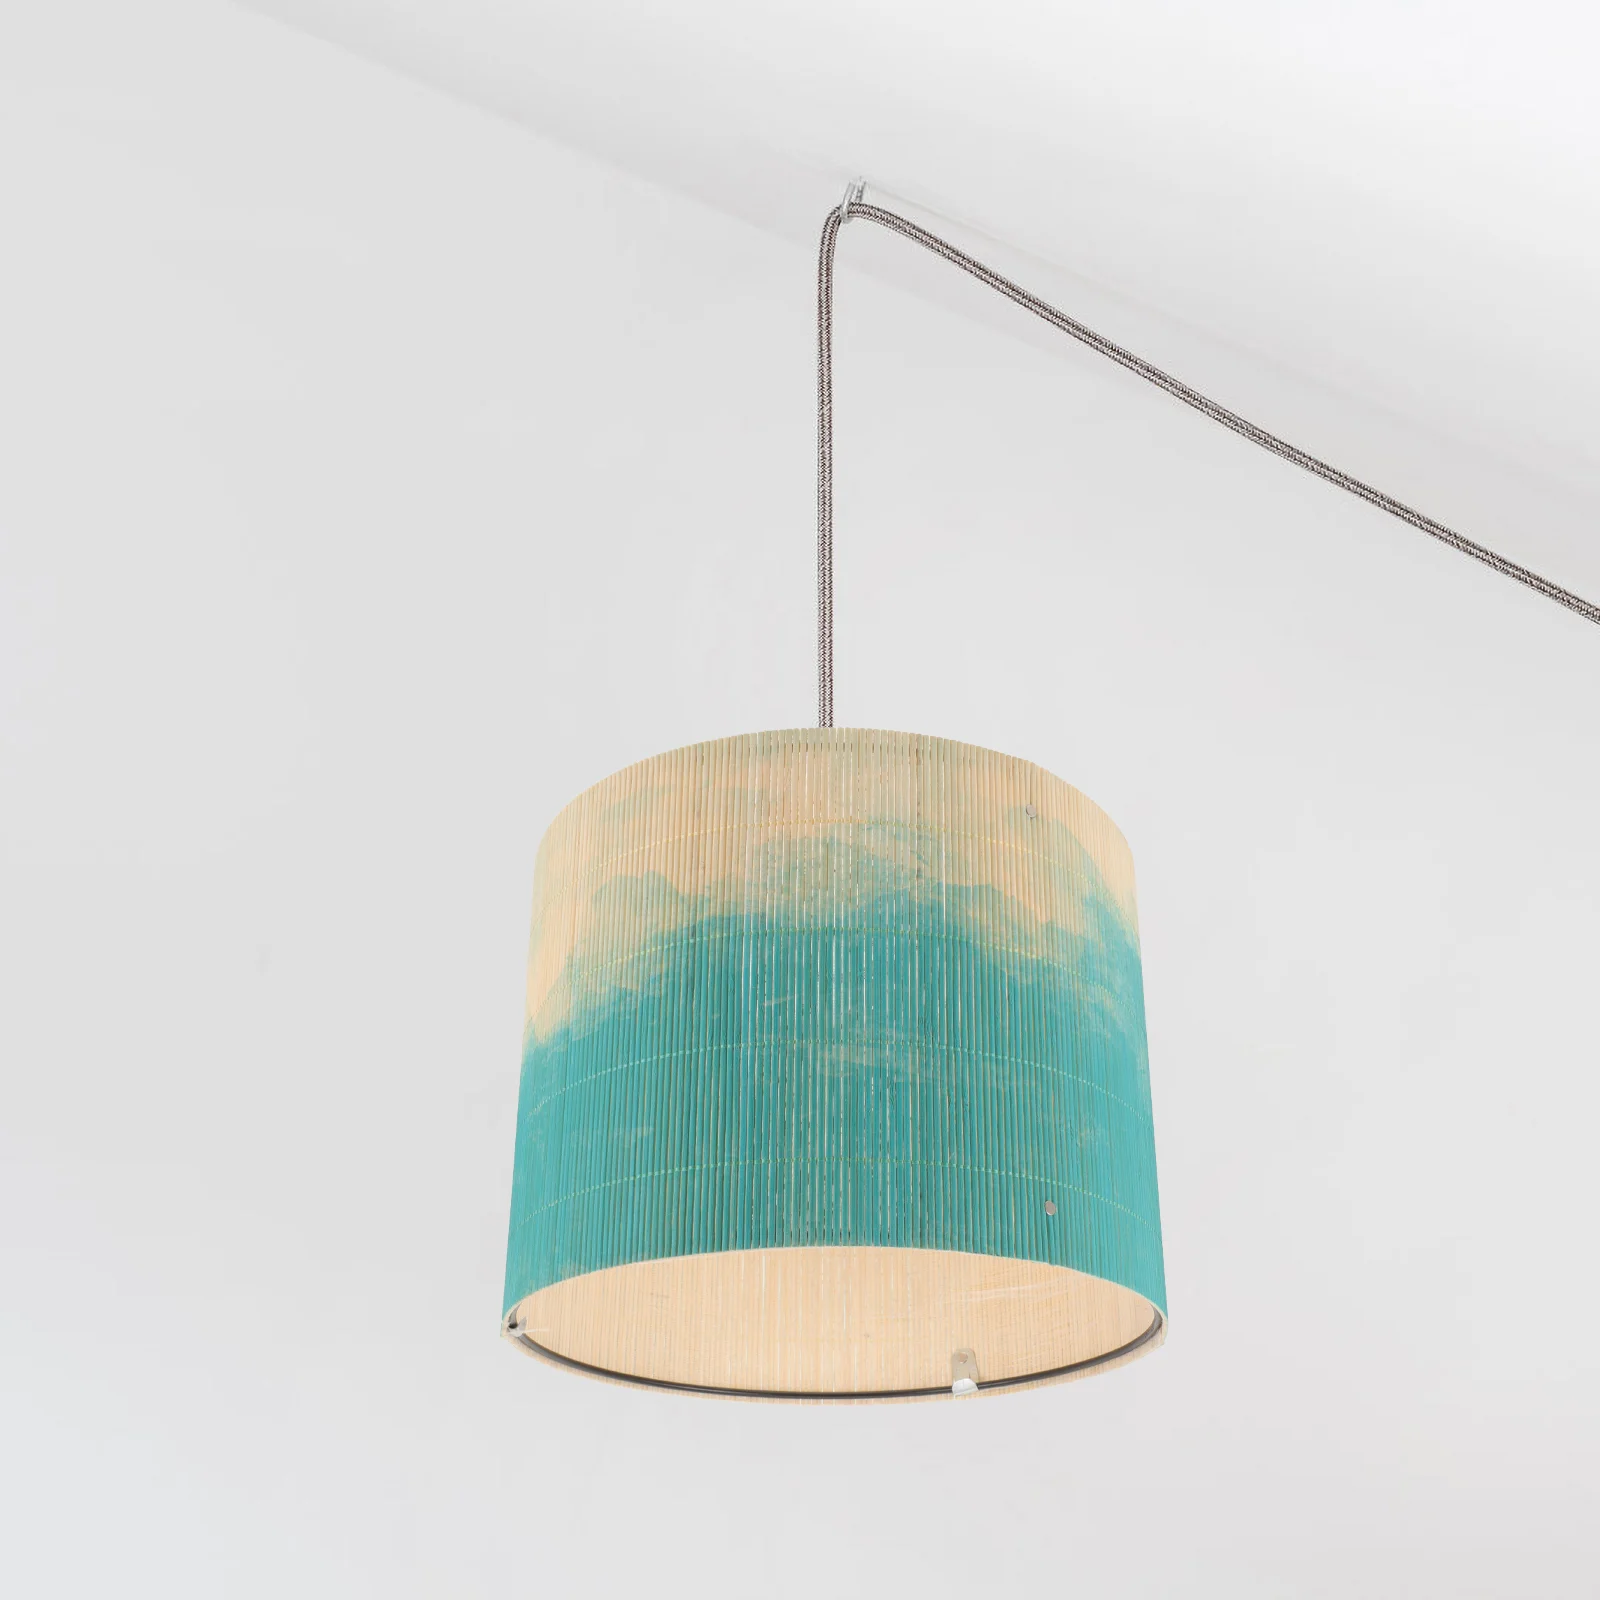 Drum Rattan Pendant Lights E27 Painting Bamboo Lampshade Vintage Gradient Chandelier Lamp Cover Cylinder Light Accessories